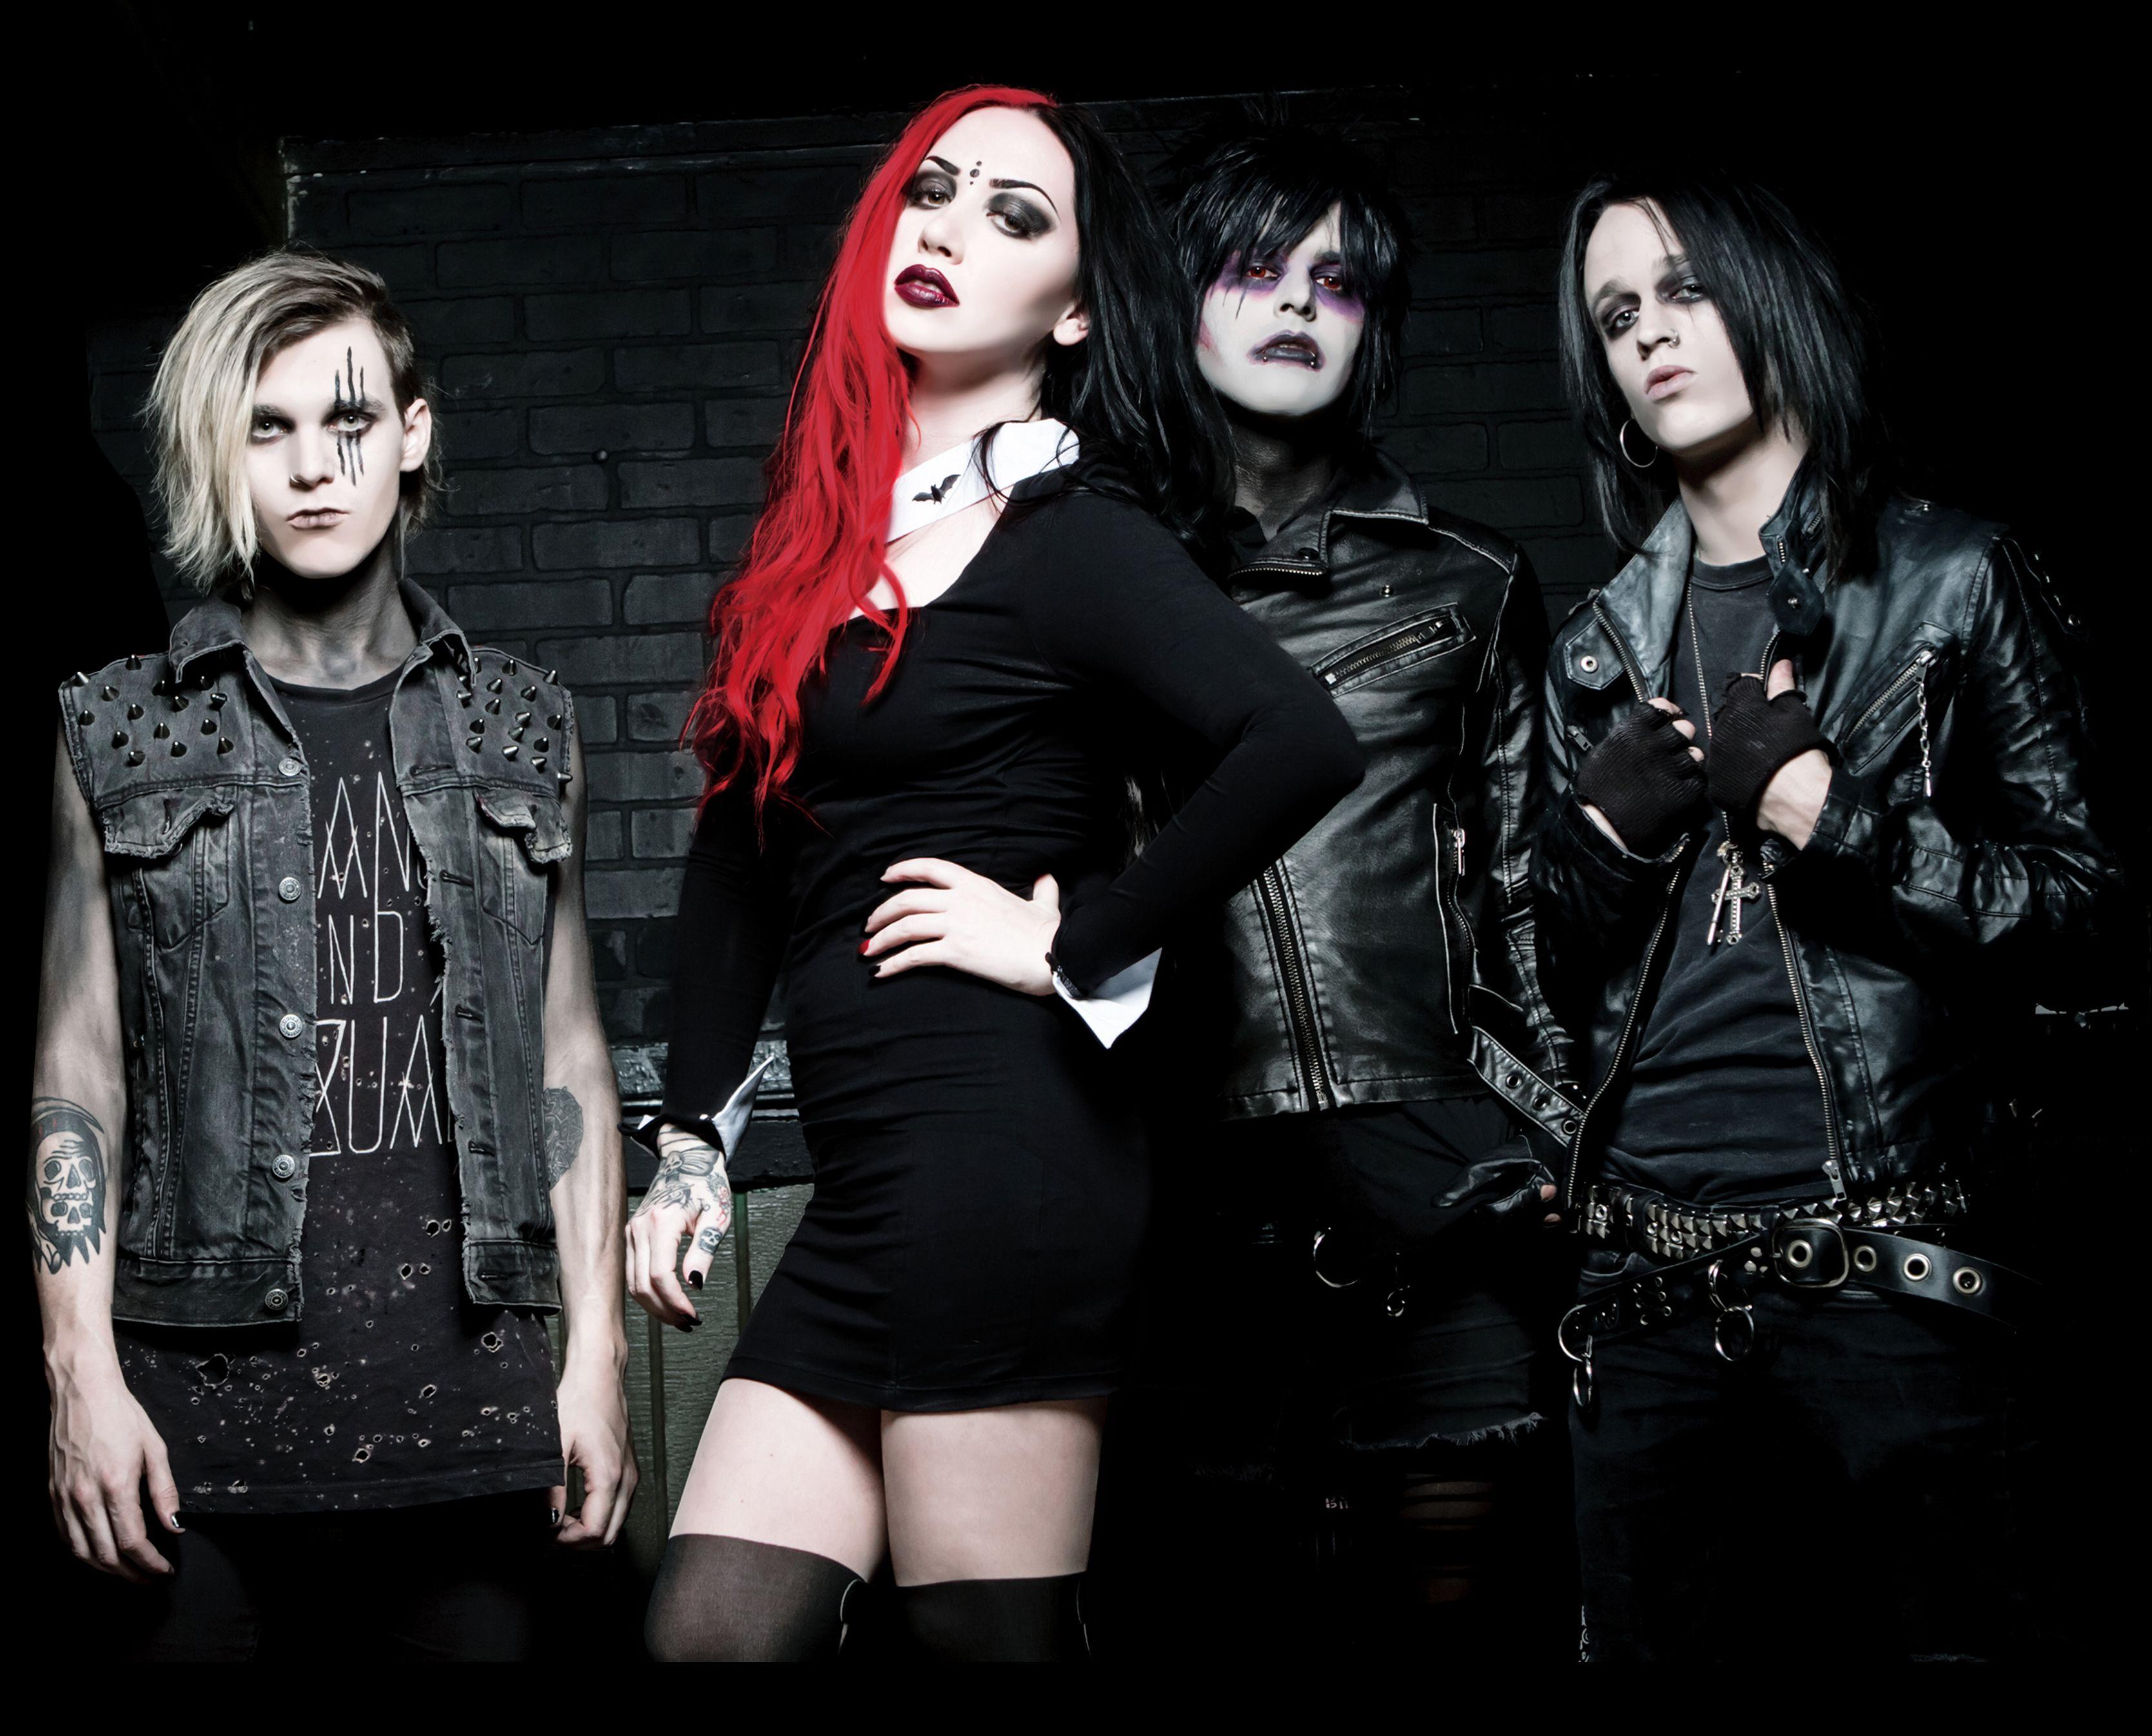 NEW YEARS DAY * GET SCARED * EYES SET TO KILL * THE RELAPSE SYMPHONY